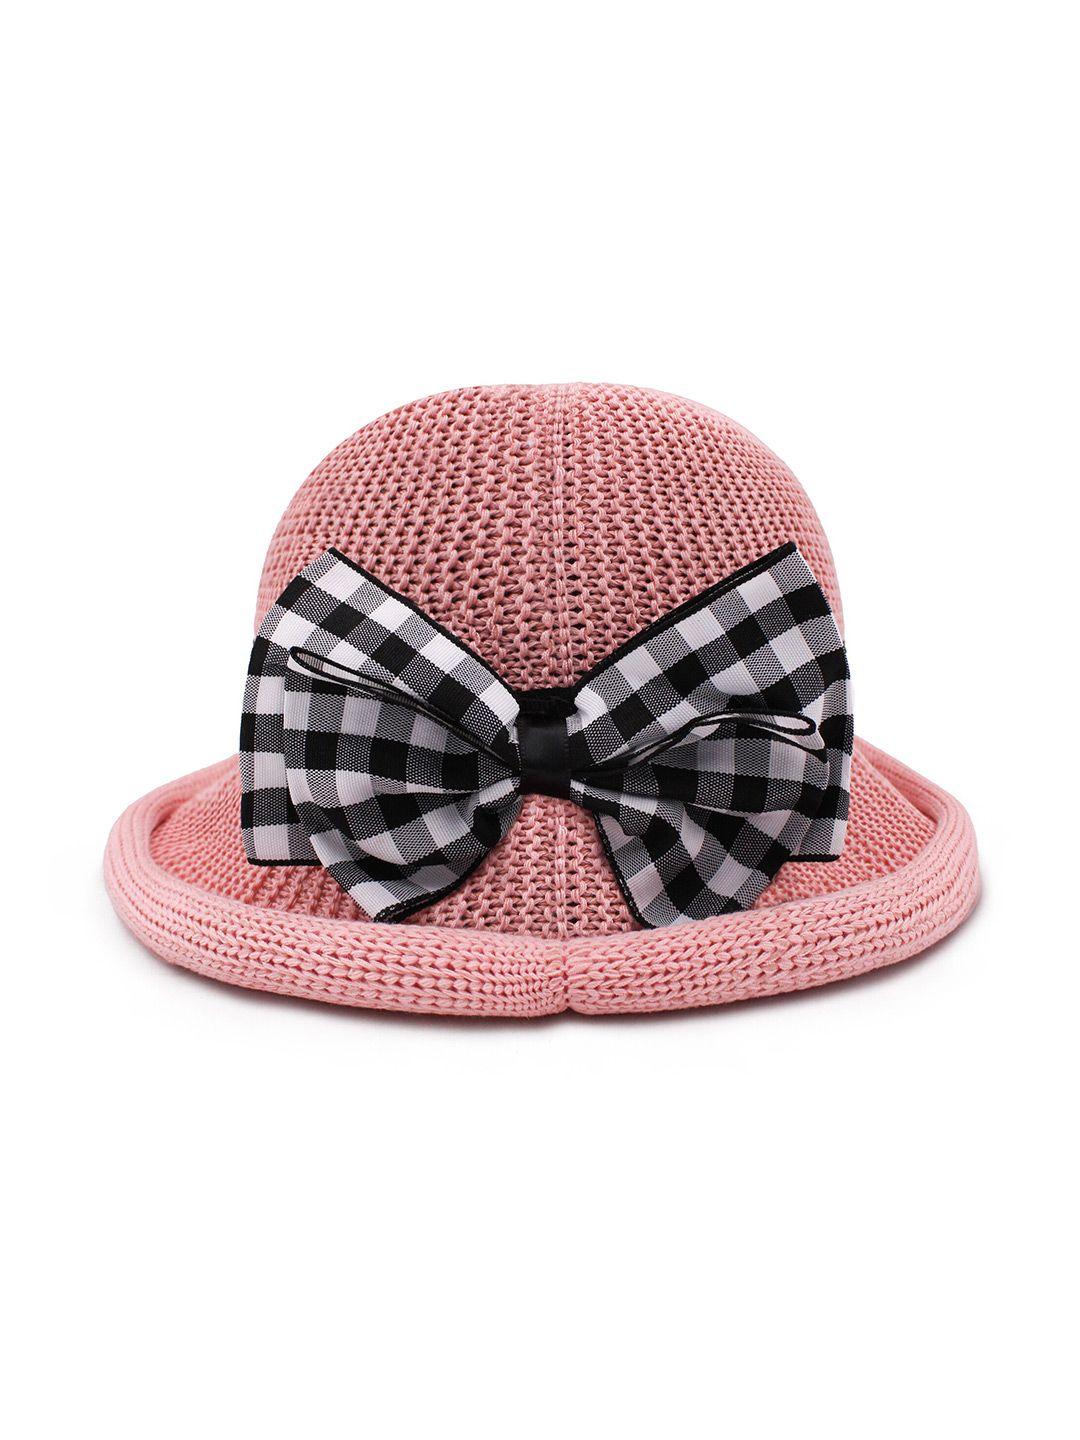 jenna kids cloth check bow breathable sun protection hat